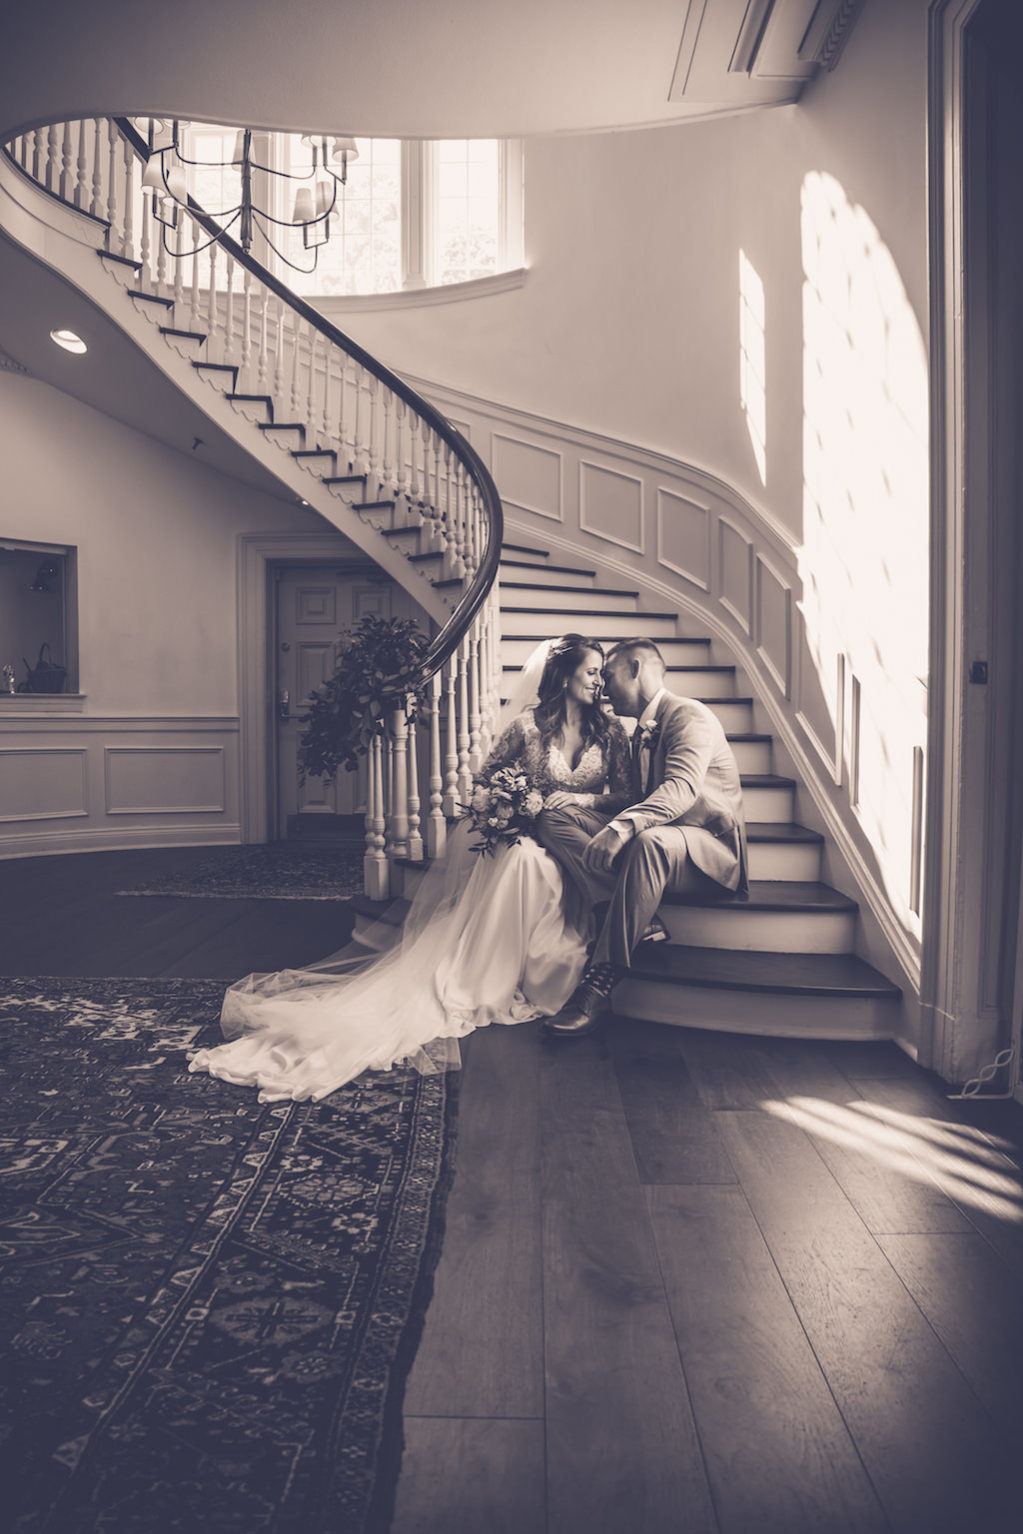 Romantic Bride and Groom Wedding Portrait on Staircase | Wedding Venue Tampa Yacht Club | Florida Luxury Wedding Photographer Luxe Light Images